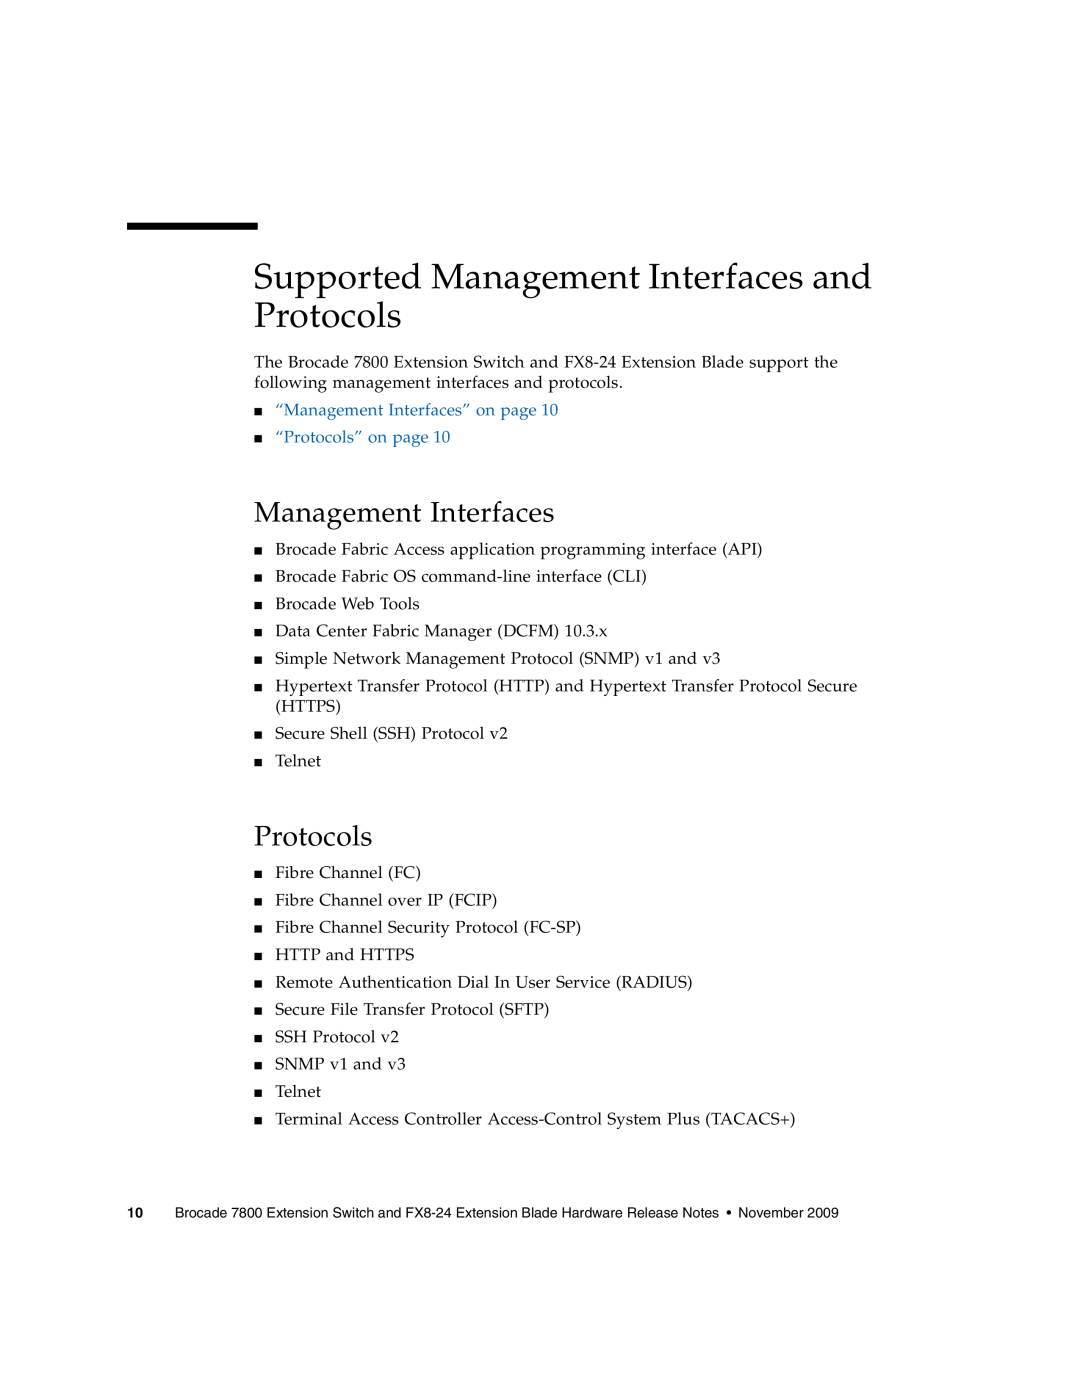 Sun Microsystems 7800 Supported Management Interfaces and Protocols, “Management Interfaces” on page “Protocols” on page 